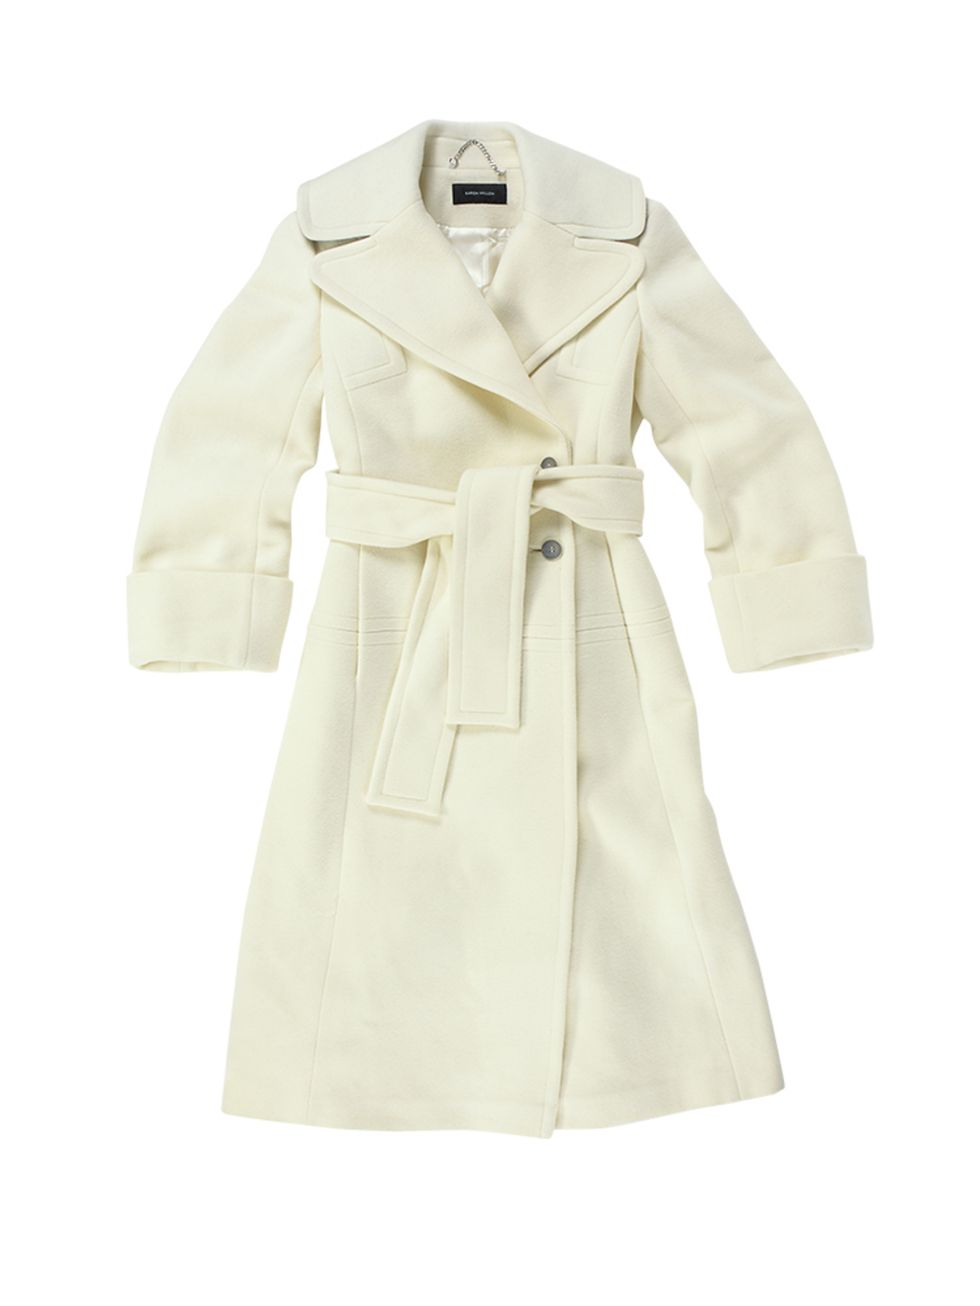 "The approach should be about confidence. Before, I would feel insecure and buy coats to cover myself up. But now I realise how playful I can be."

Wool coat, £350, Karen Millen